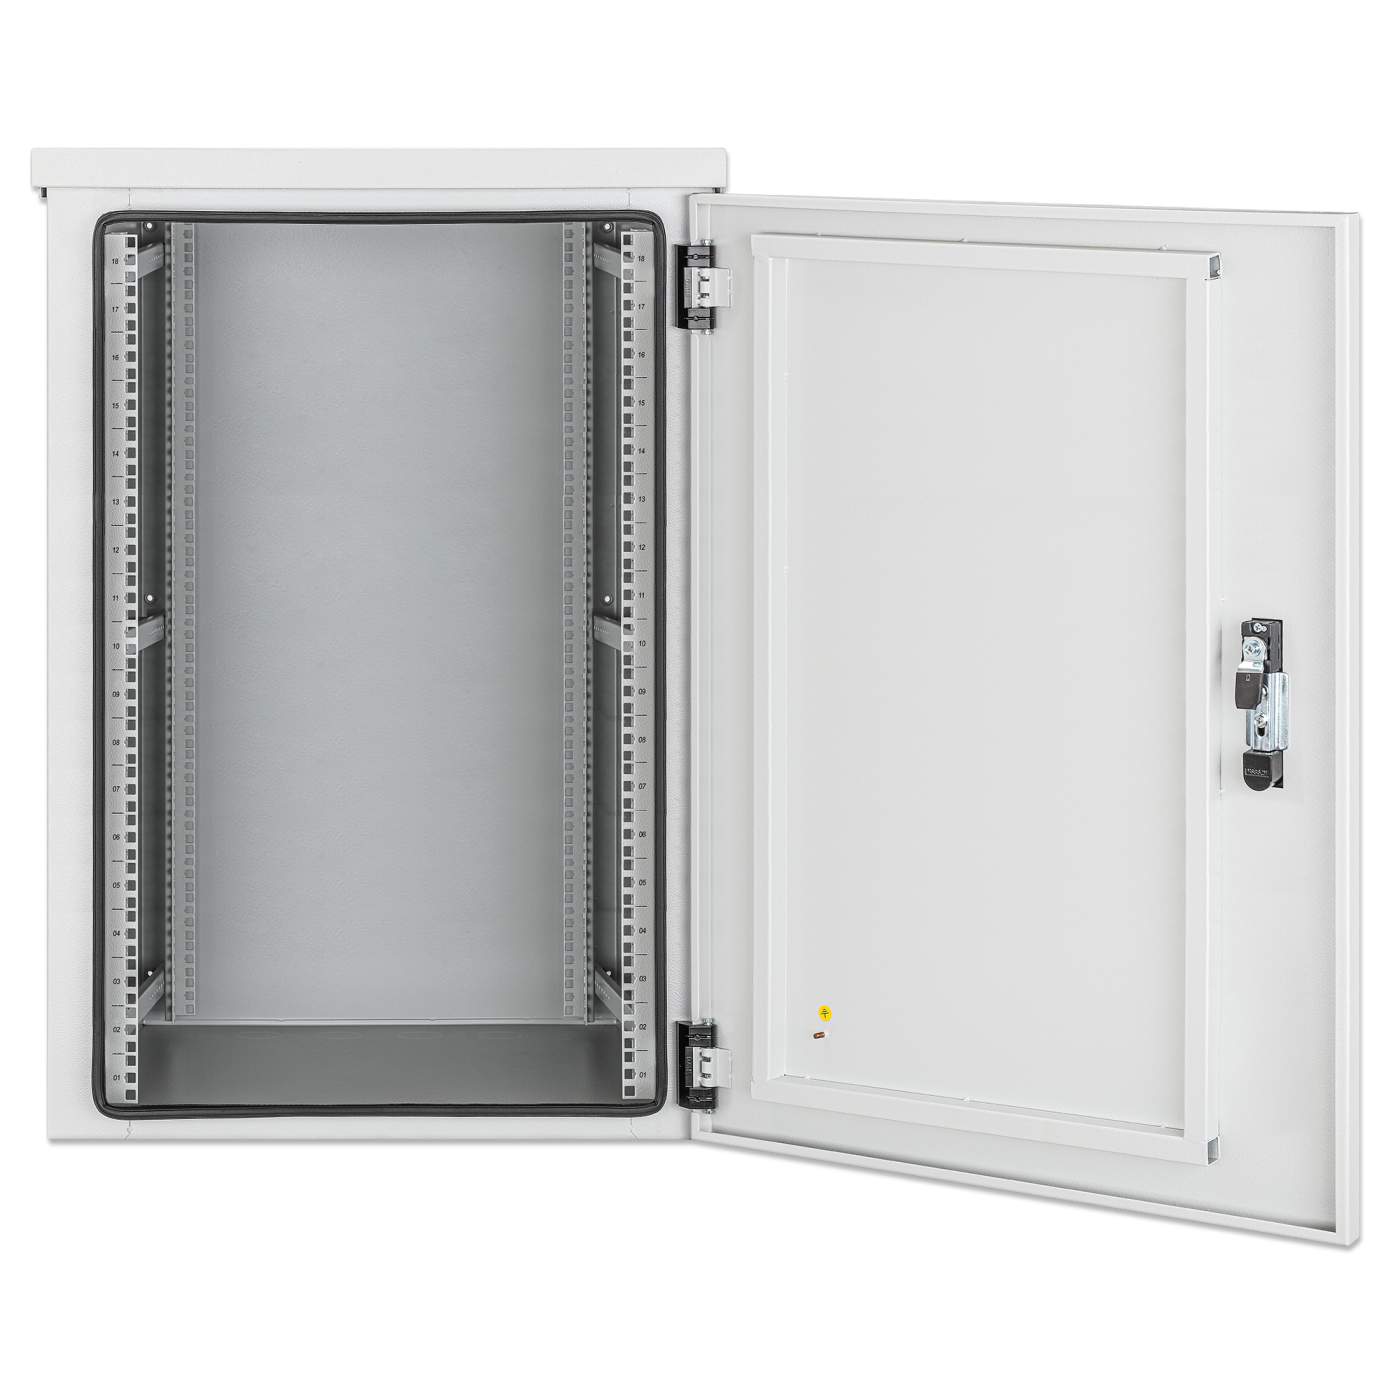 Industrial IP55 19" Wall Mount Cabinet with Integrated Fans, 18U Image 5